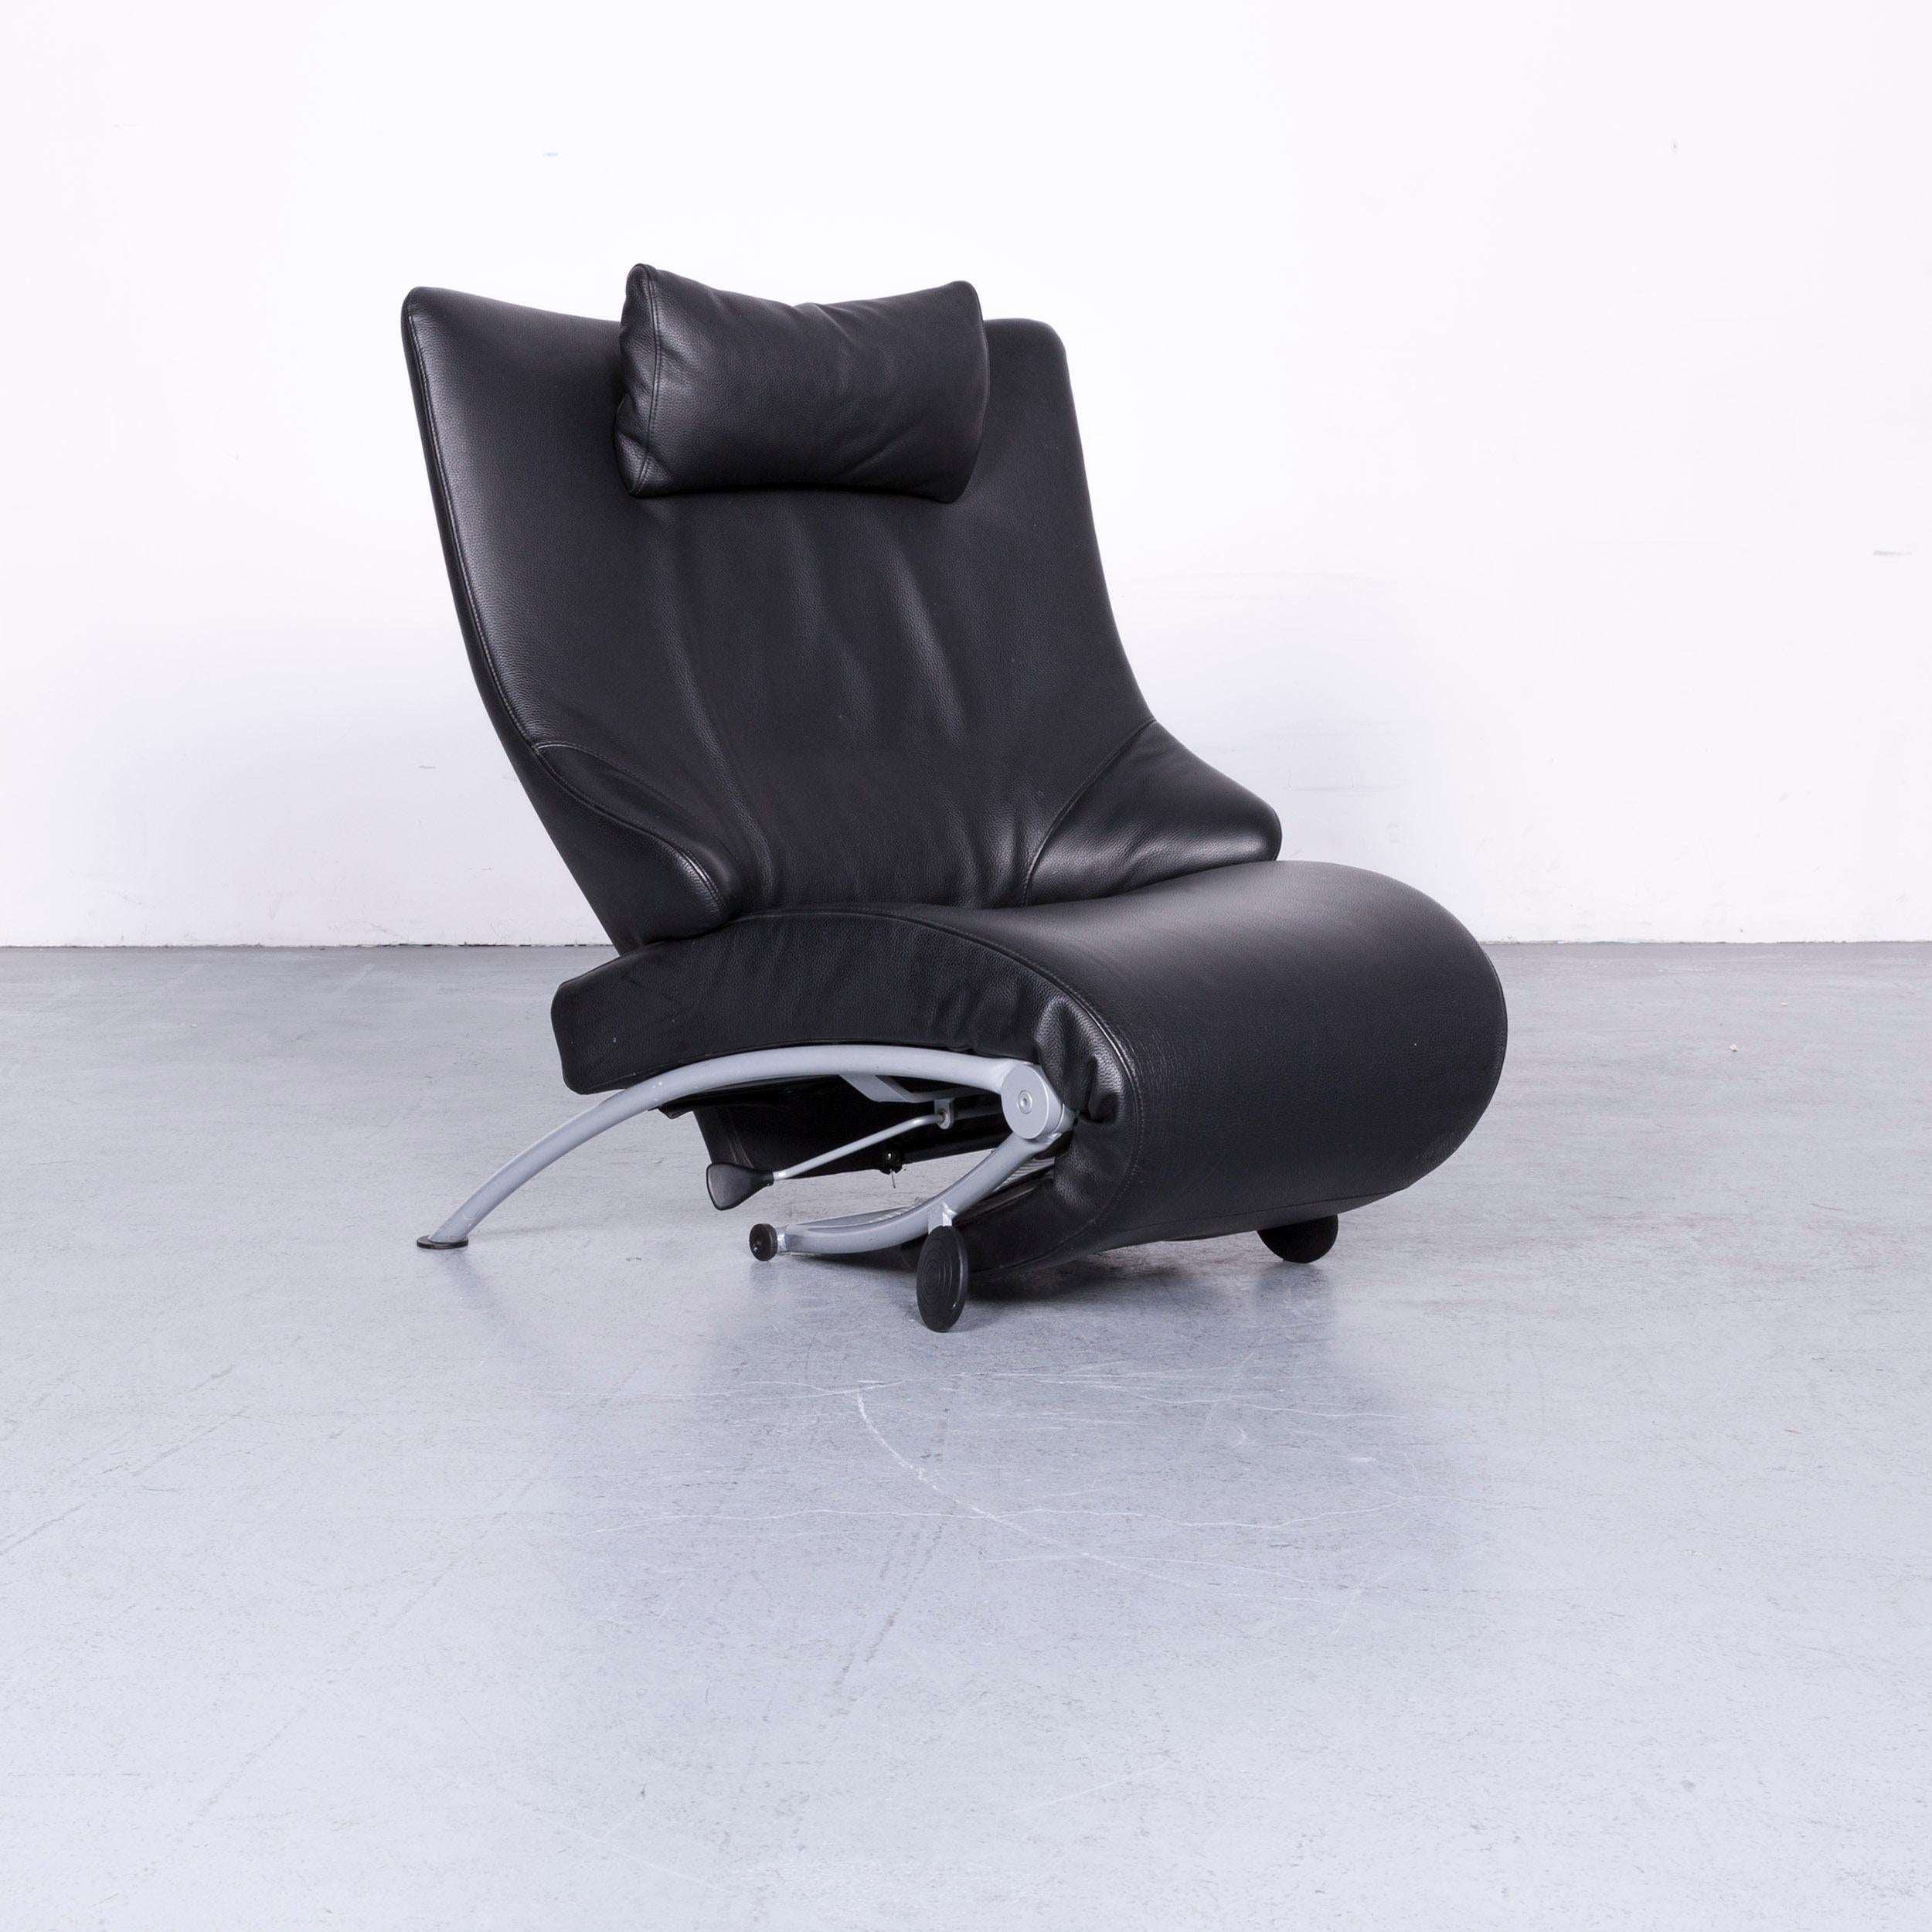 We bring to you a WK Wohnen solo 699 designer leather chair black one-seat.

















  